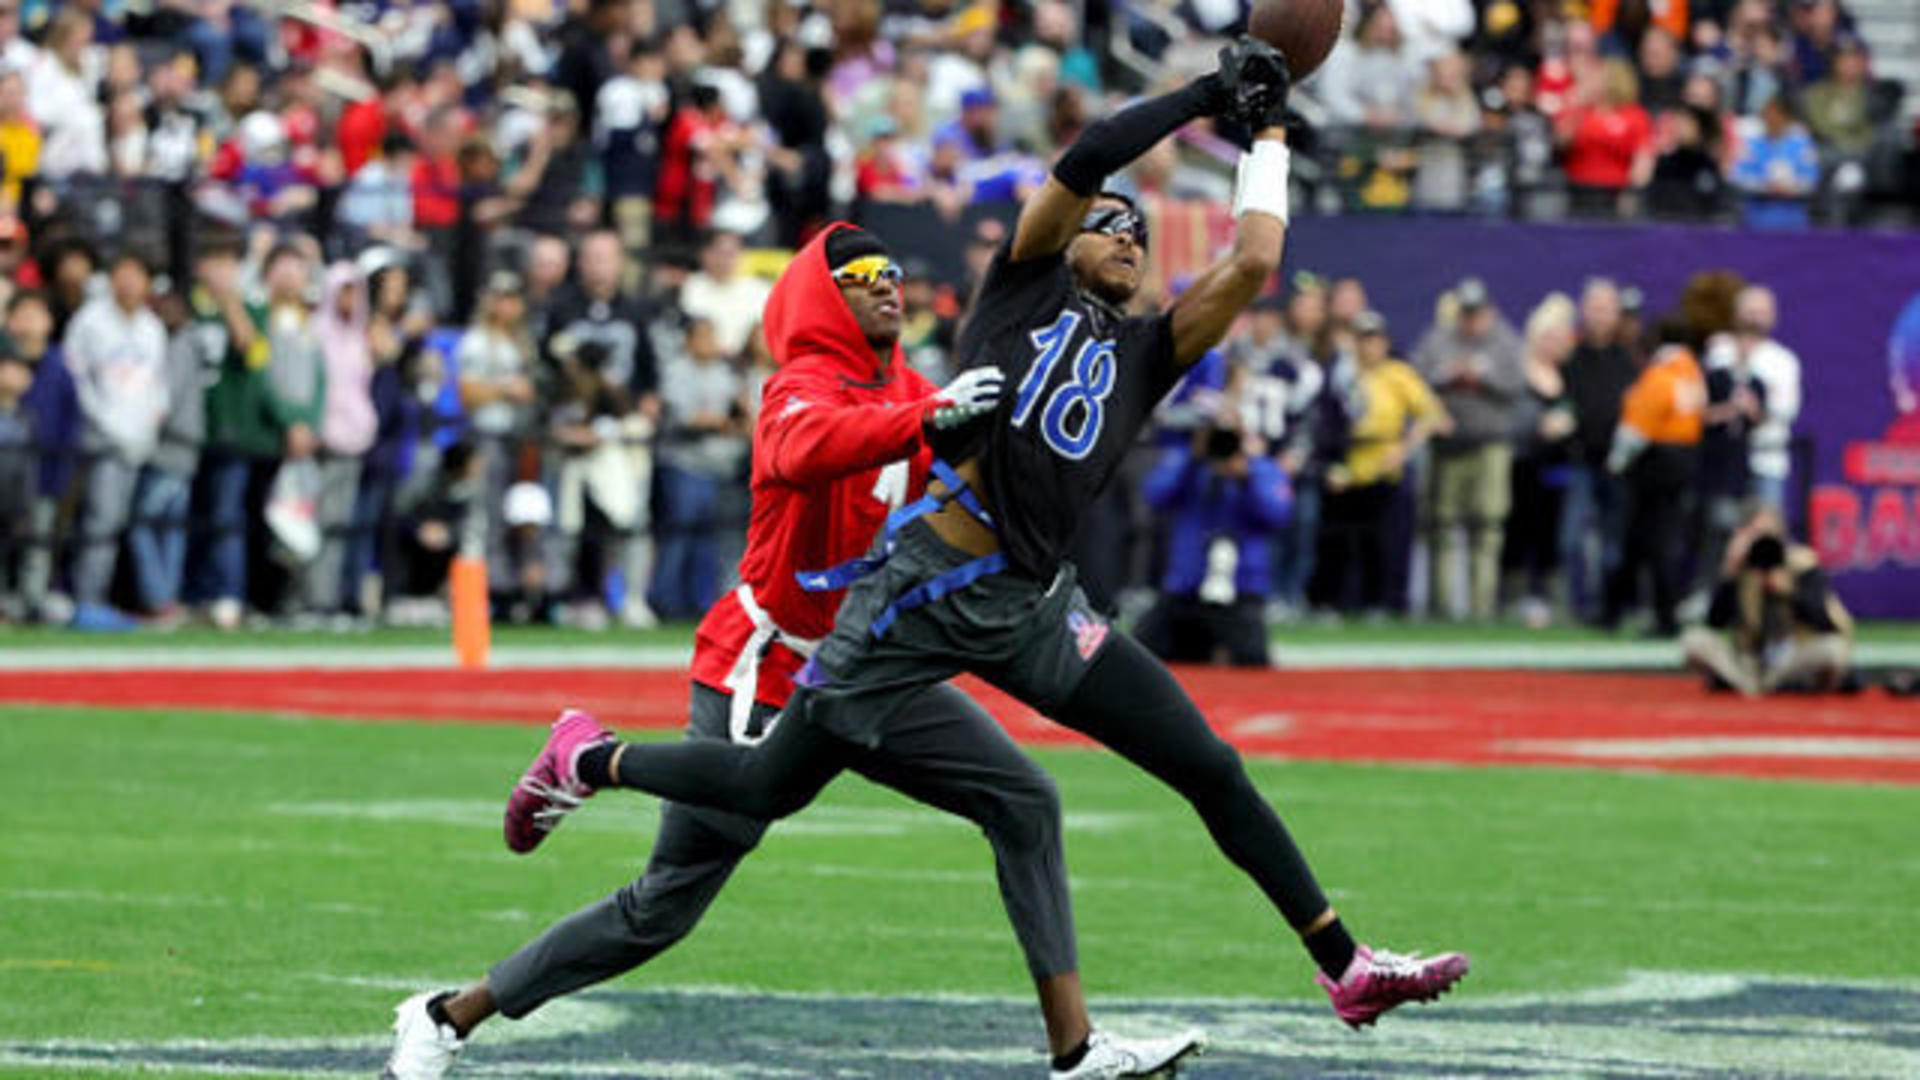 NFL rolls out revamped Pro Bowl with flag football, skills competitions -  CBS News